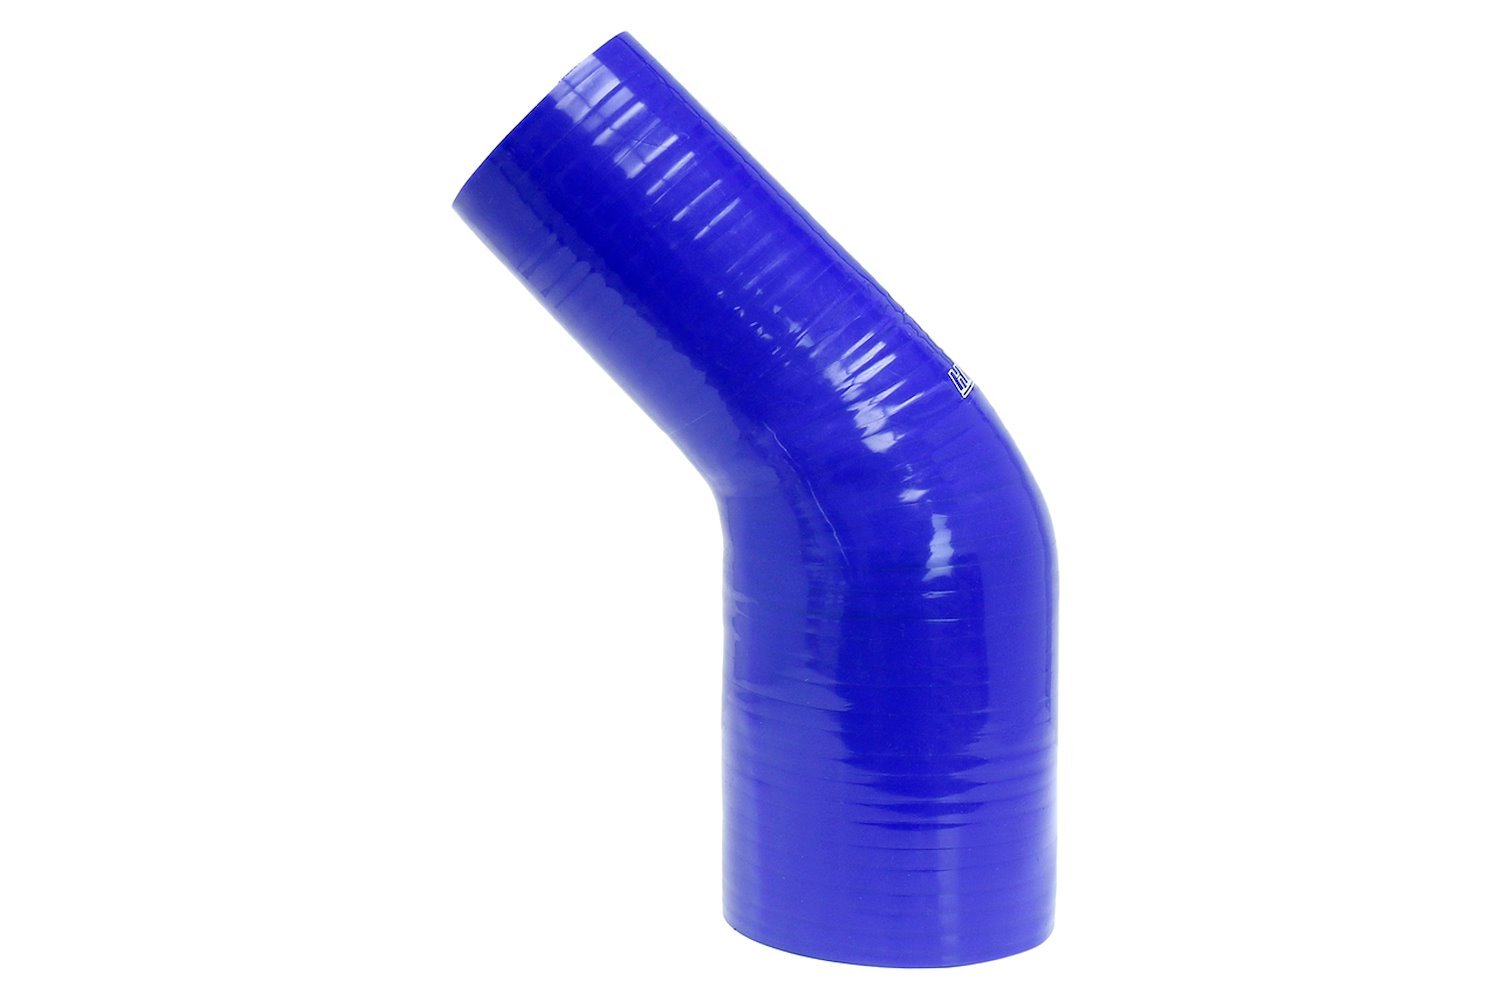 HTSER45-275-400-BLUE Silicone 45-Degree Elbow Hose, High-Temp 4-Ply Reinforced, 2-3/4 in. - 4 in. ID, Blue